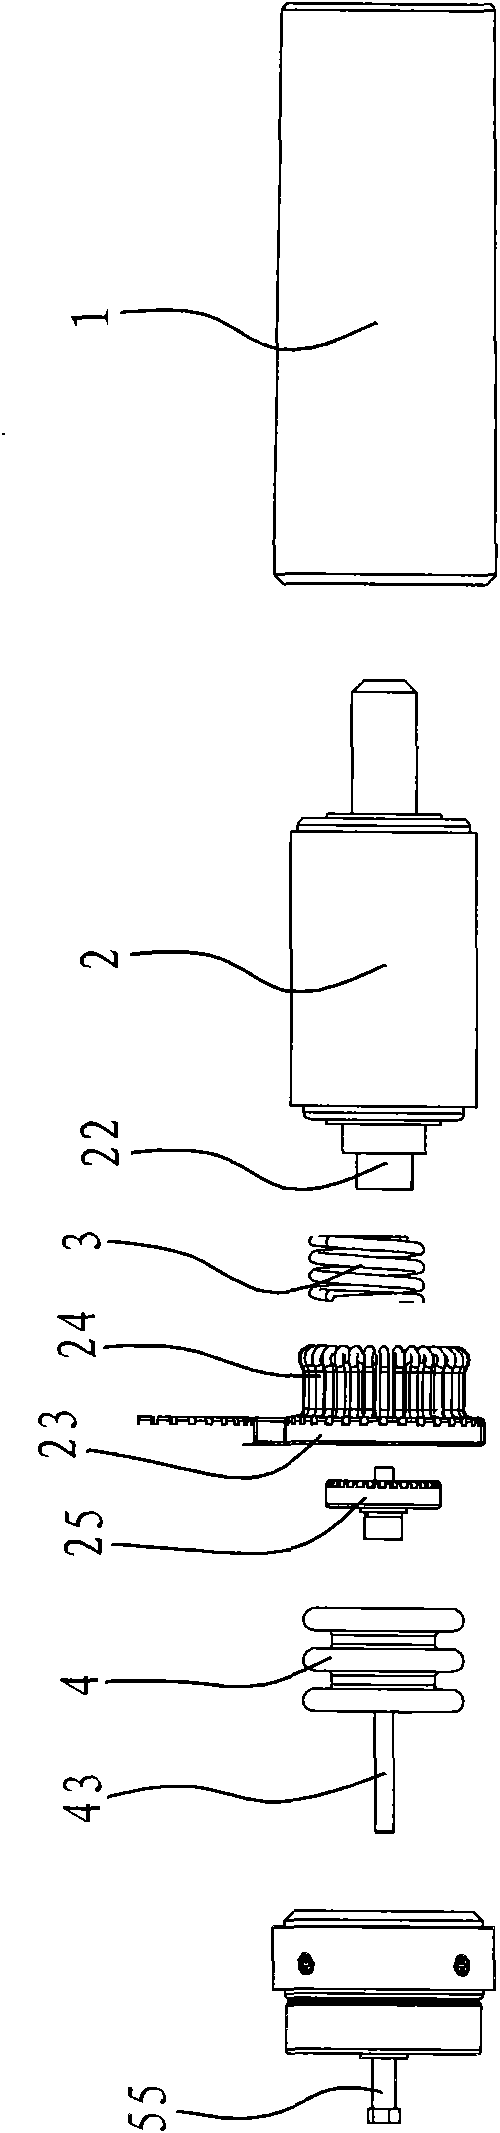 Permanent-magnetic vacuum one-way switch